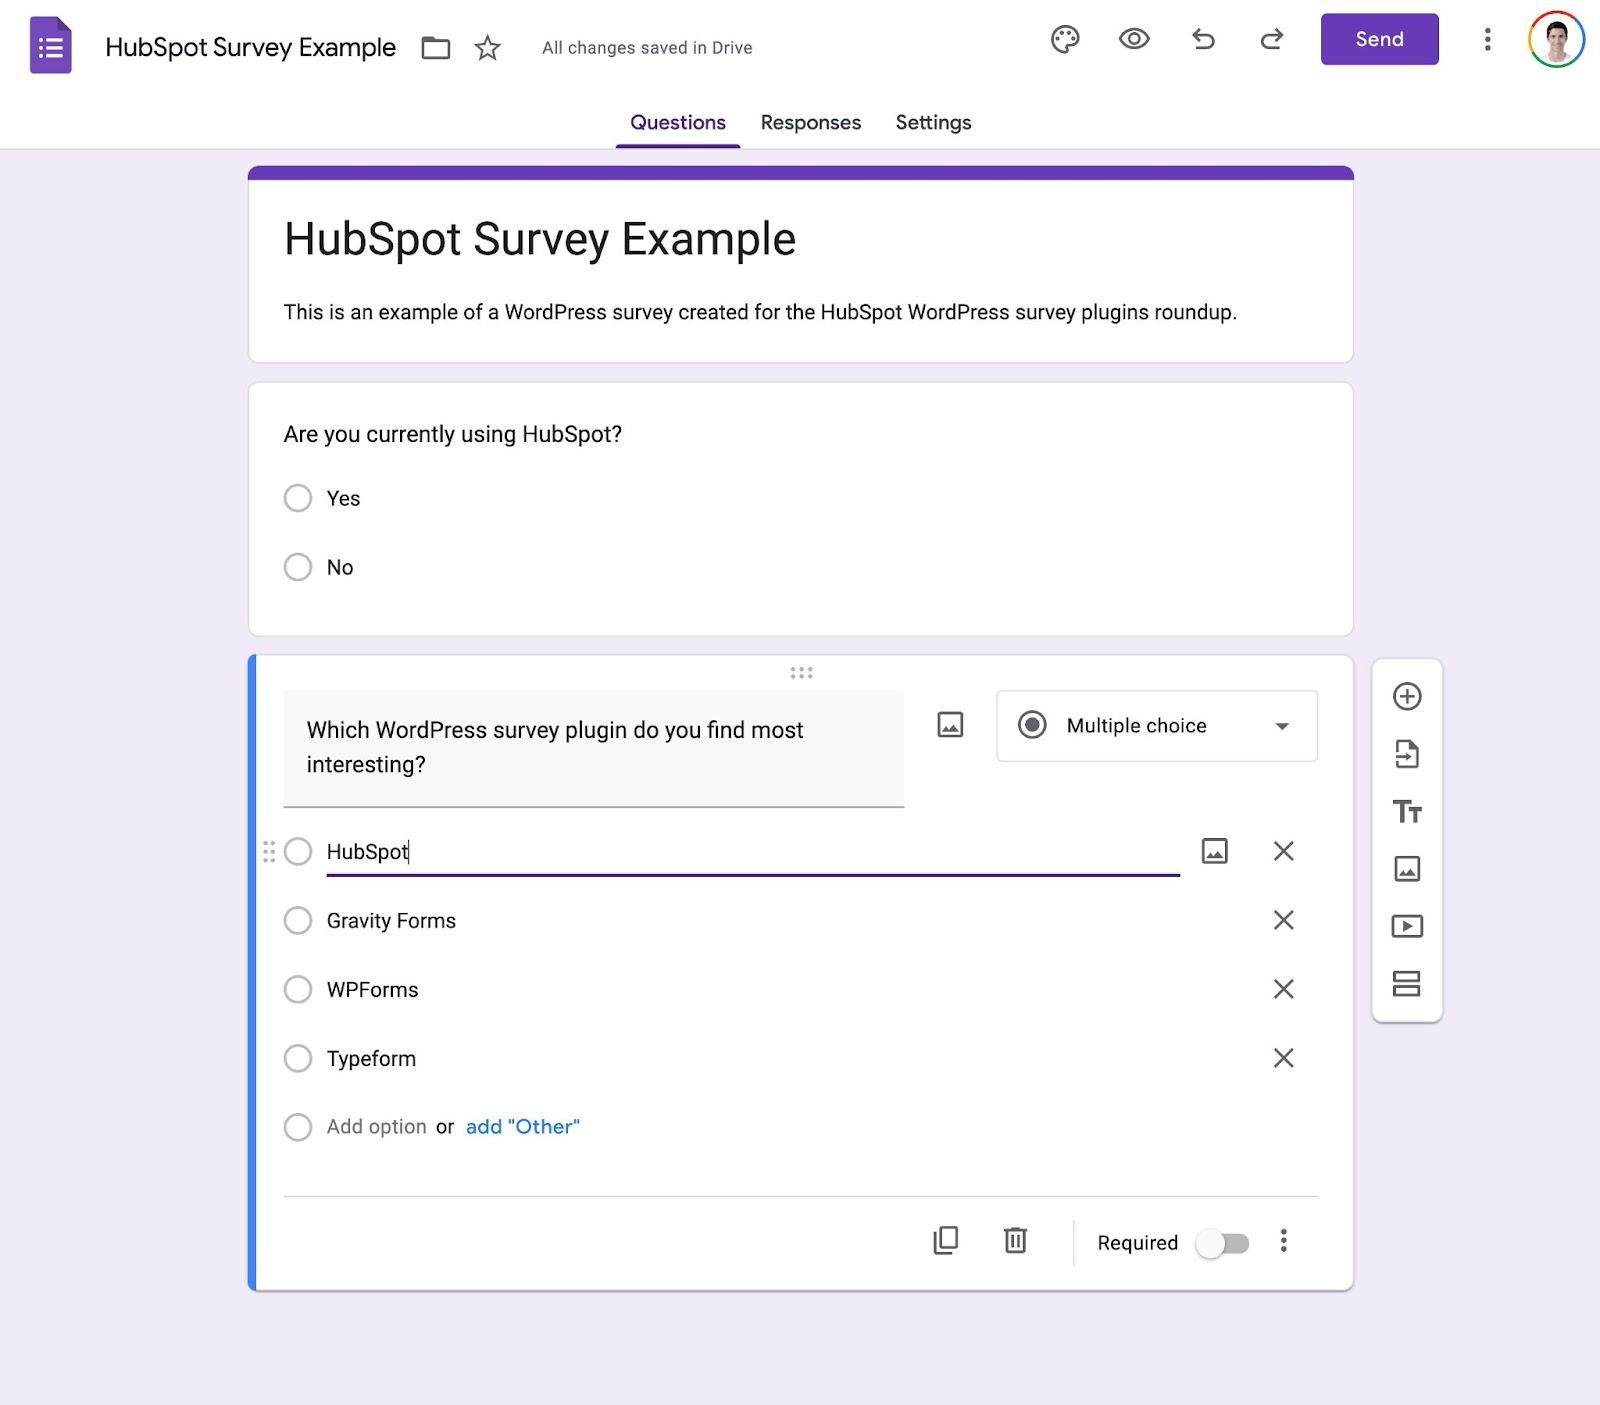 The Google Forms survey interface